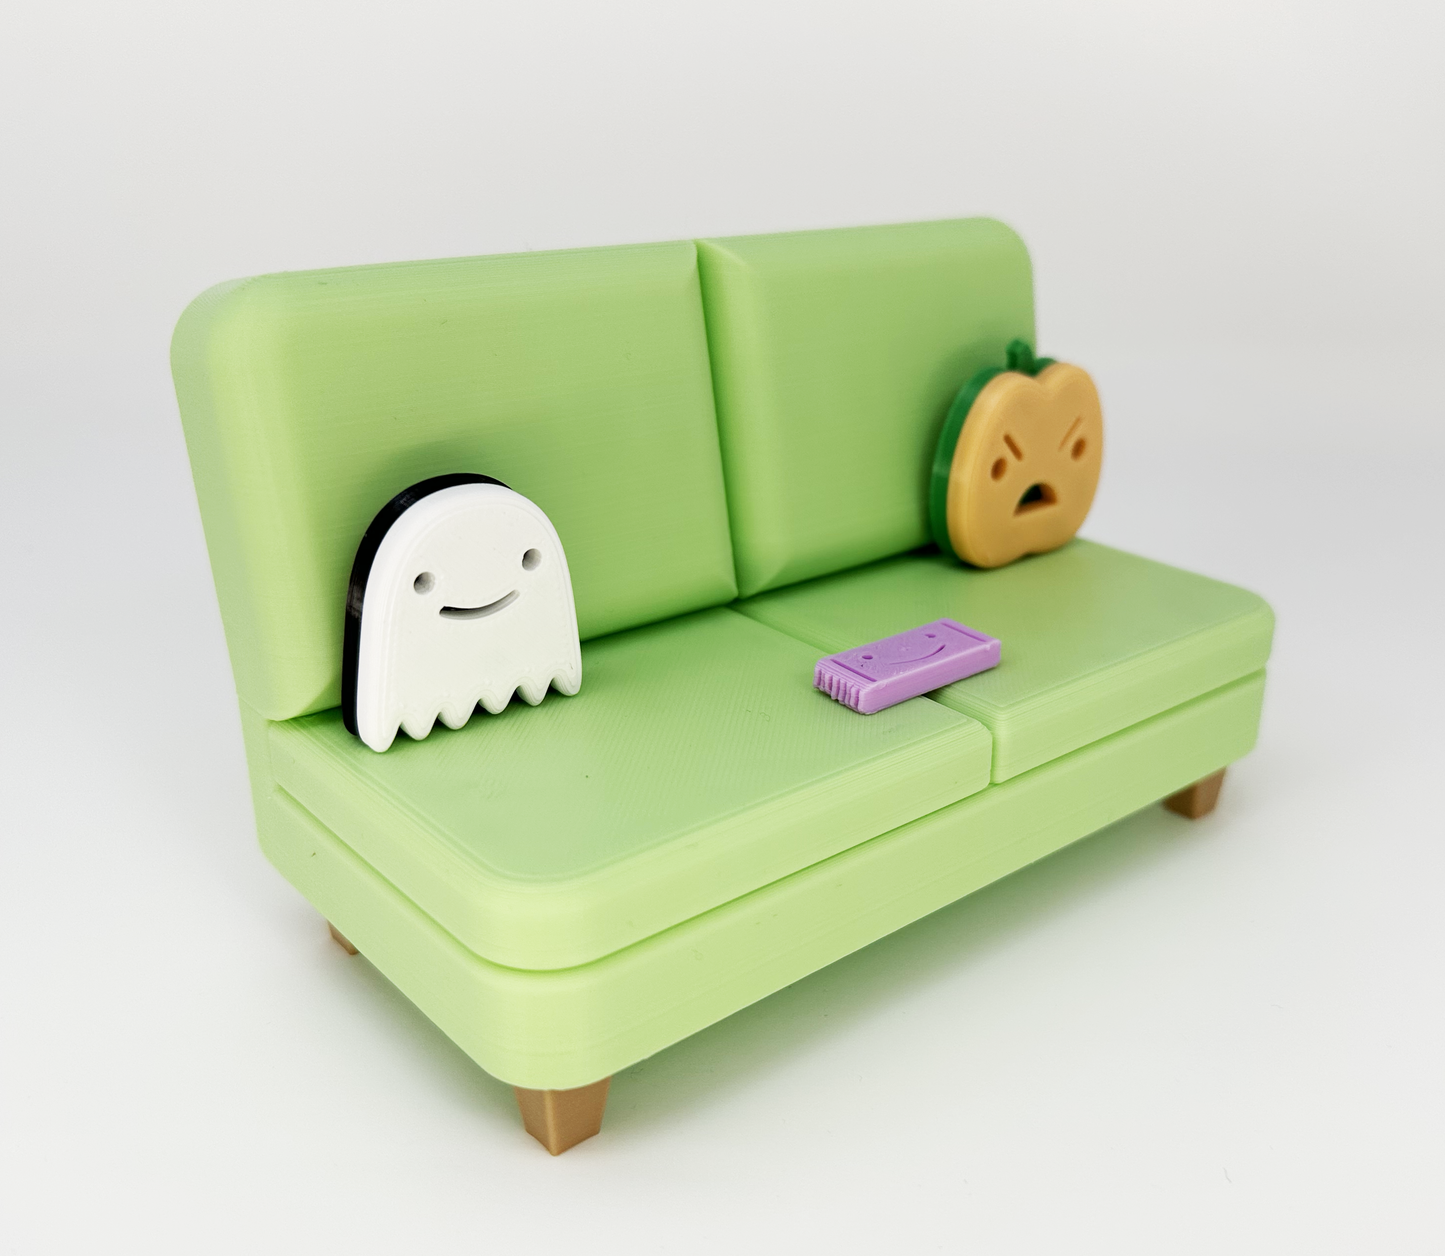 The Halloween Colab Couch Phone Holder with Candy Bar and Ghost + Pumpkin Pillows